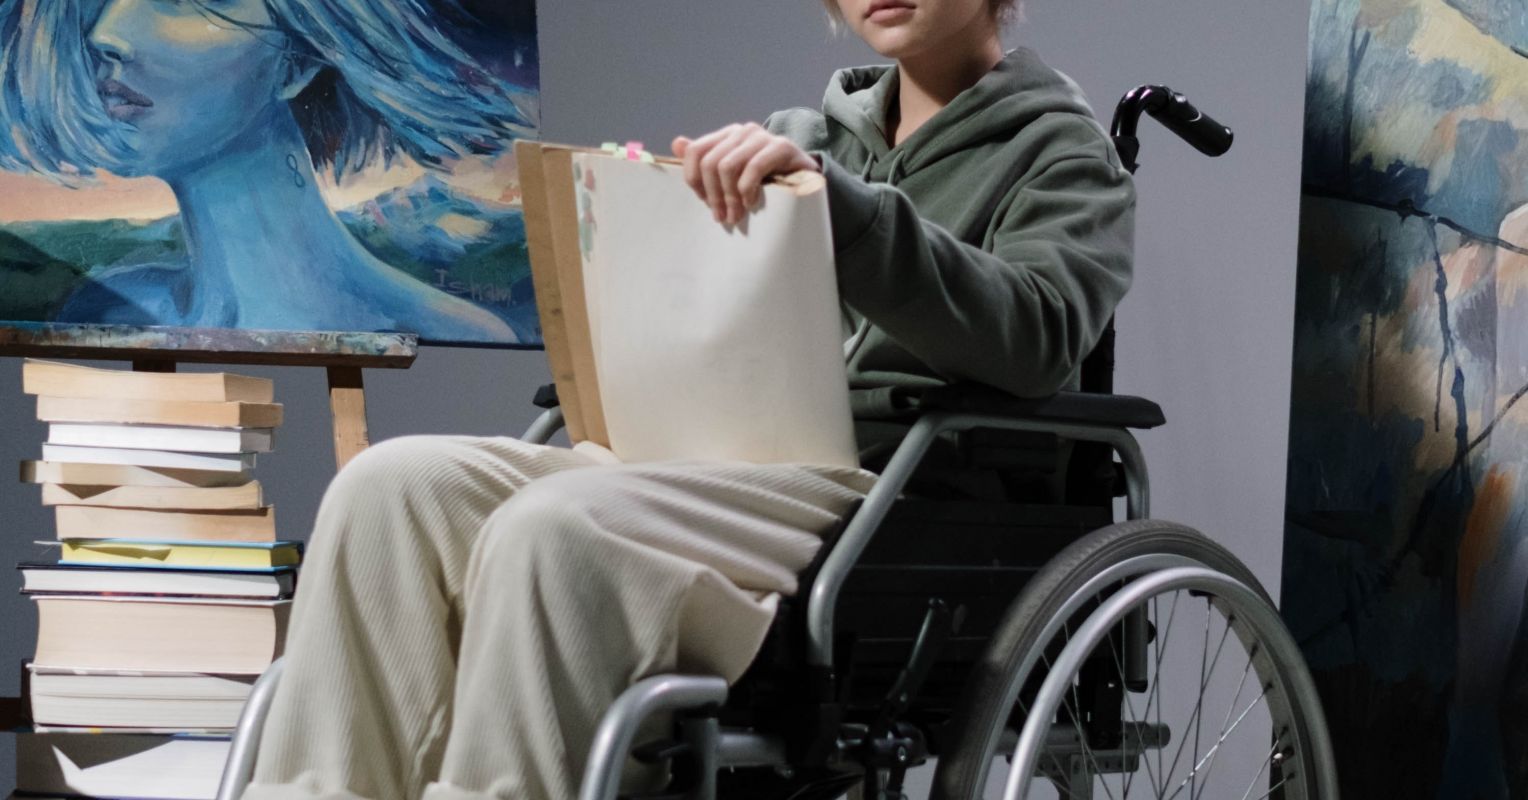 Disabled, Asian American, and Proud